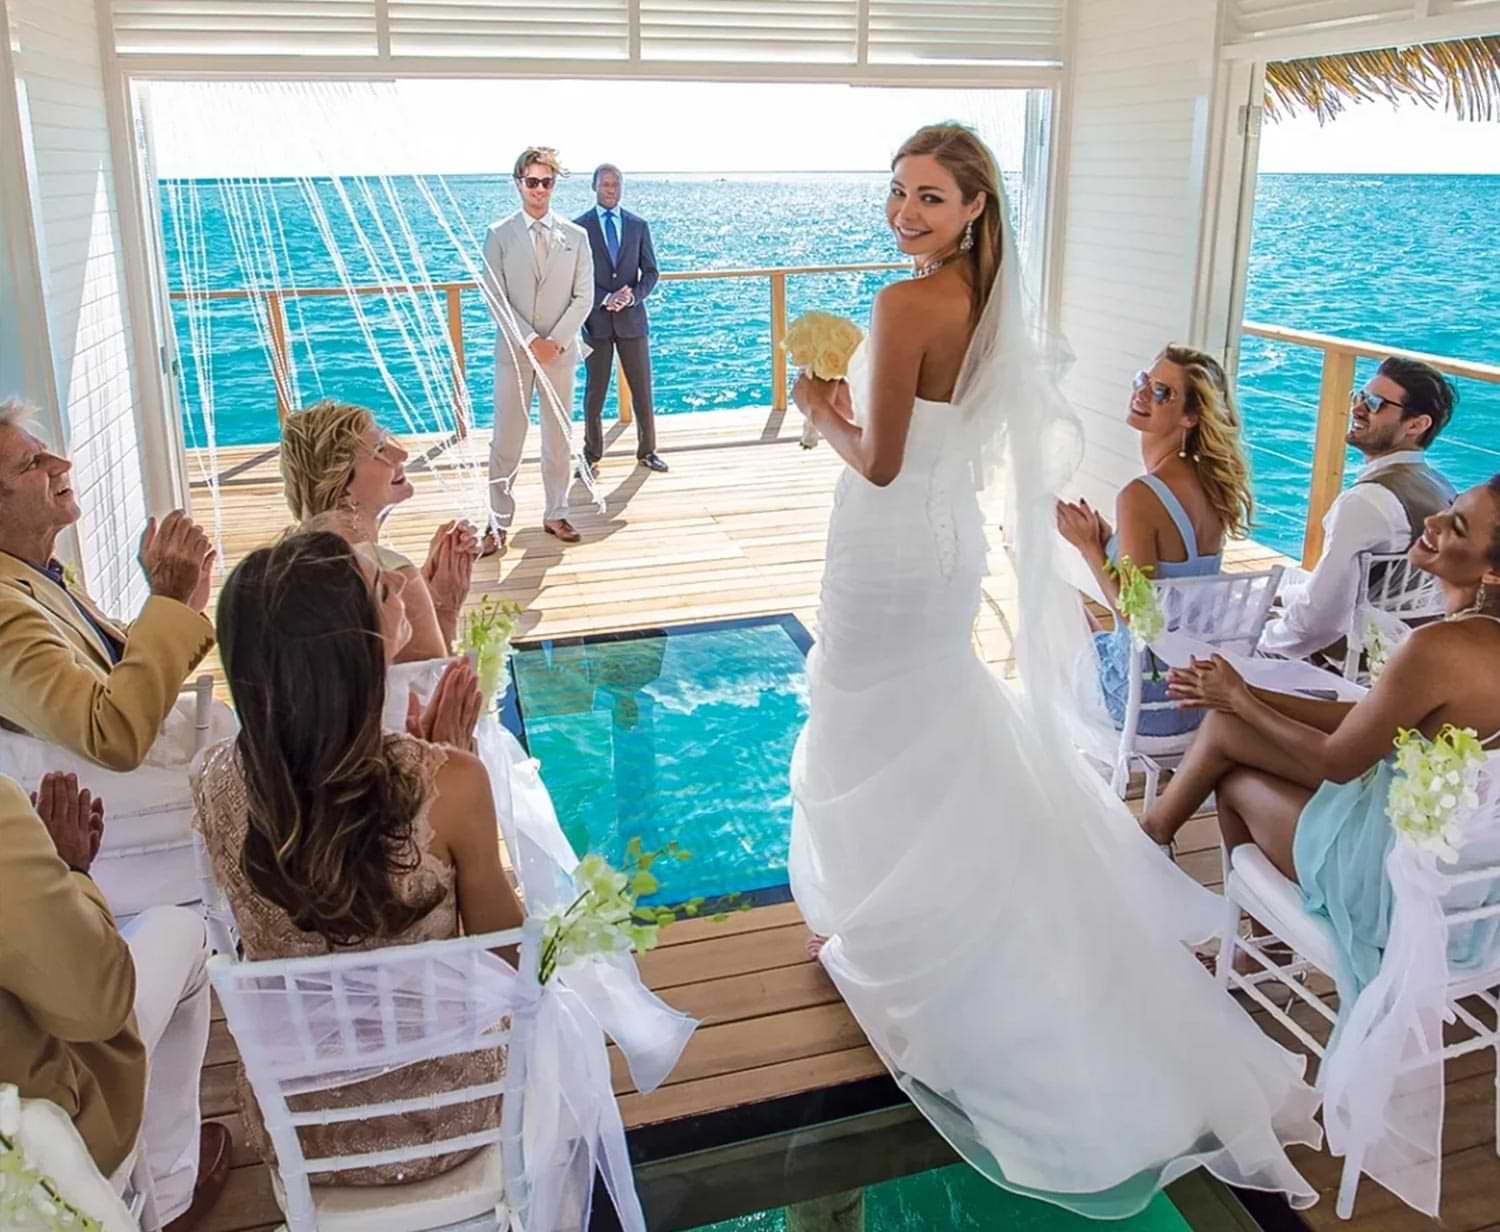 a bride walks down the aisle of a wedding ceremony held in a over-water bungalow